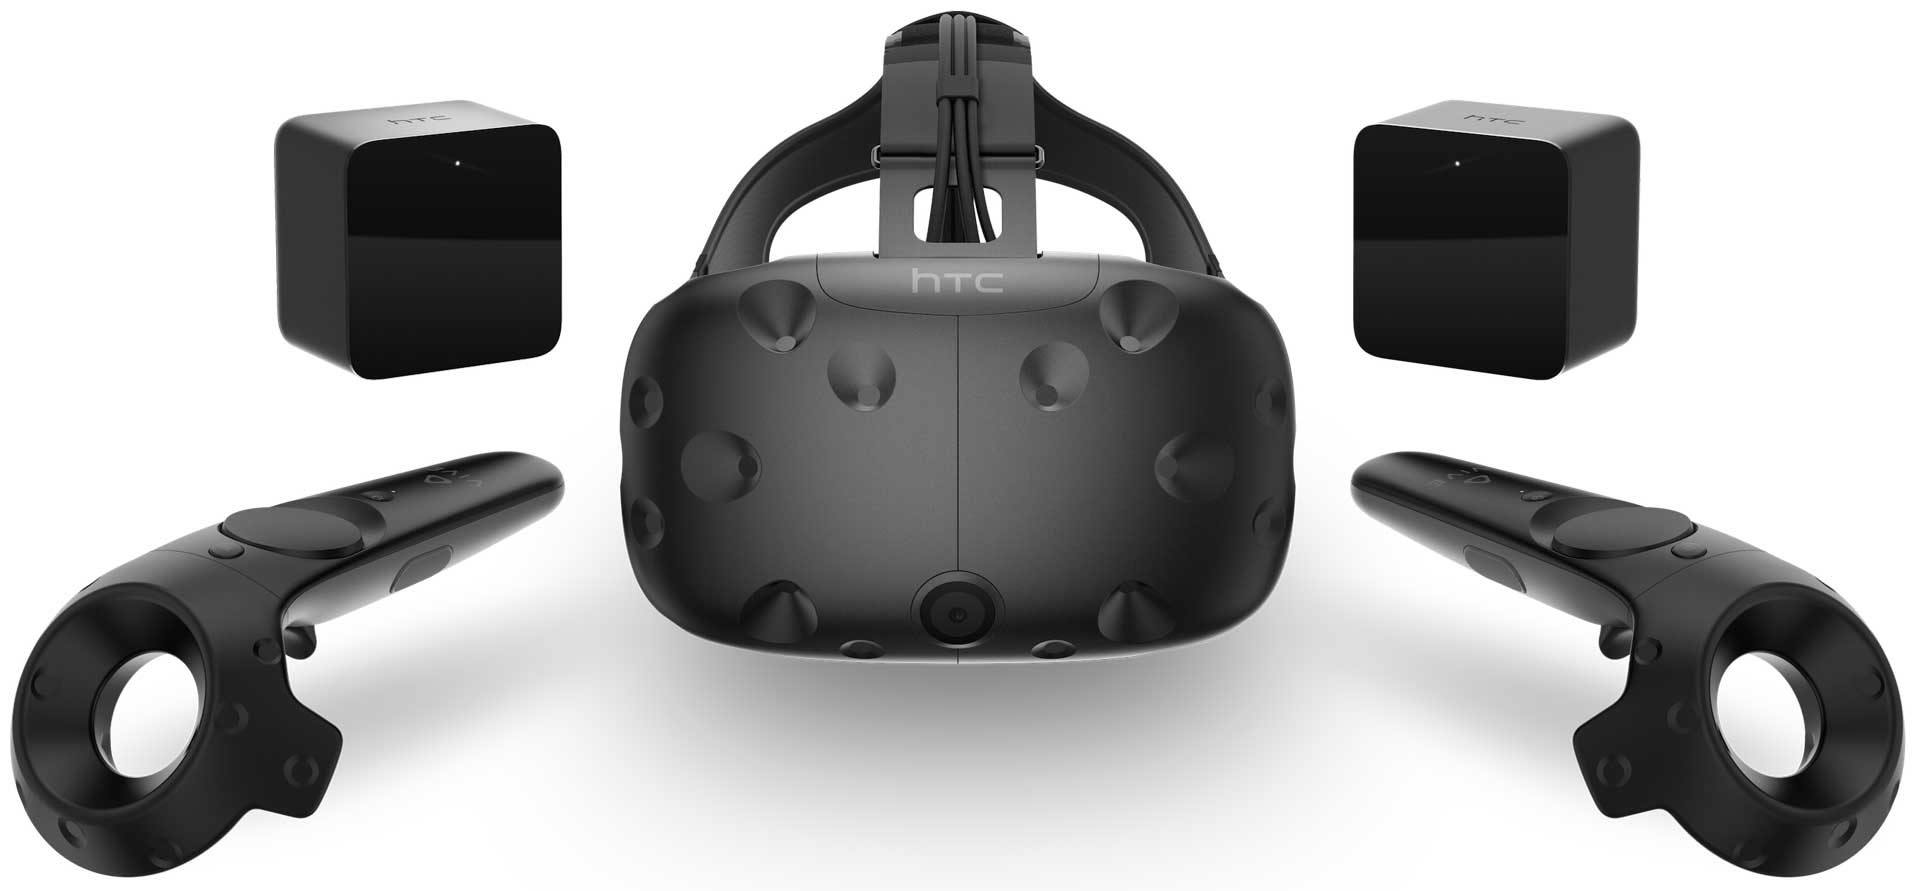 The HTC VIve is a VR headset that has seen an increase of users thanks to a discount in March.